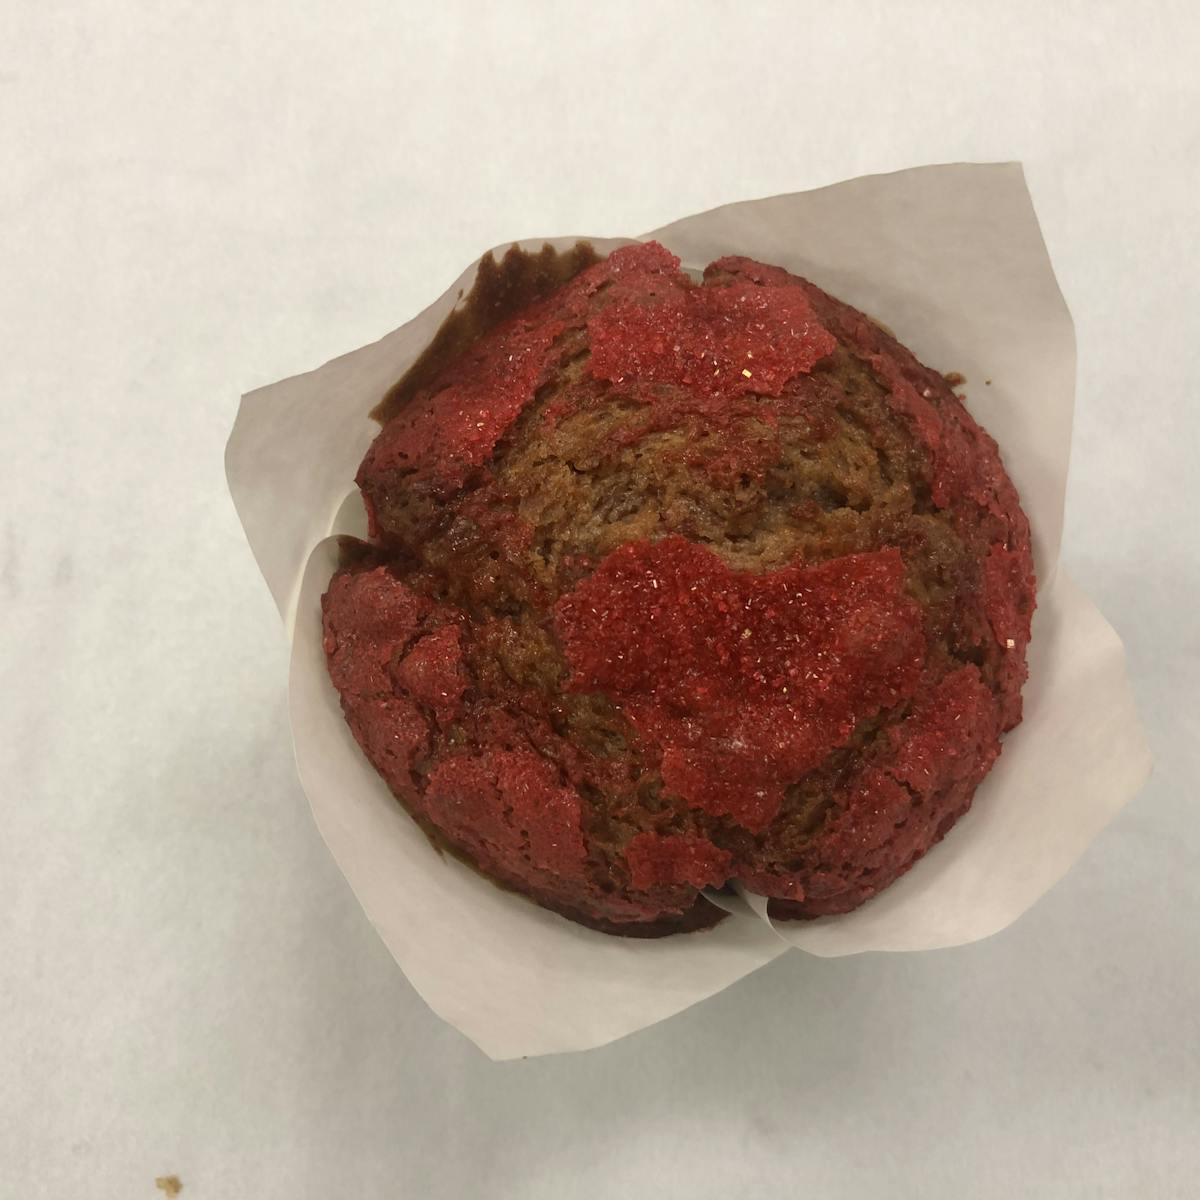 a red muffin